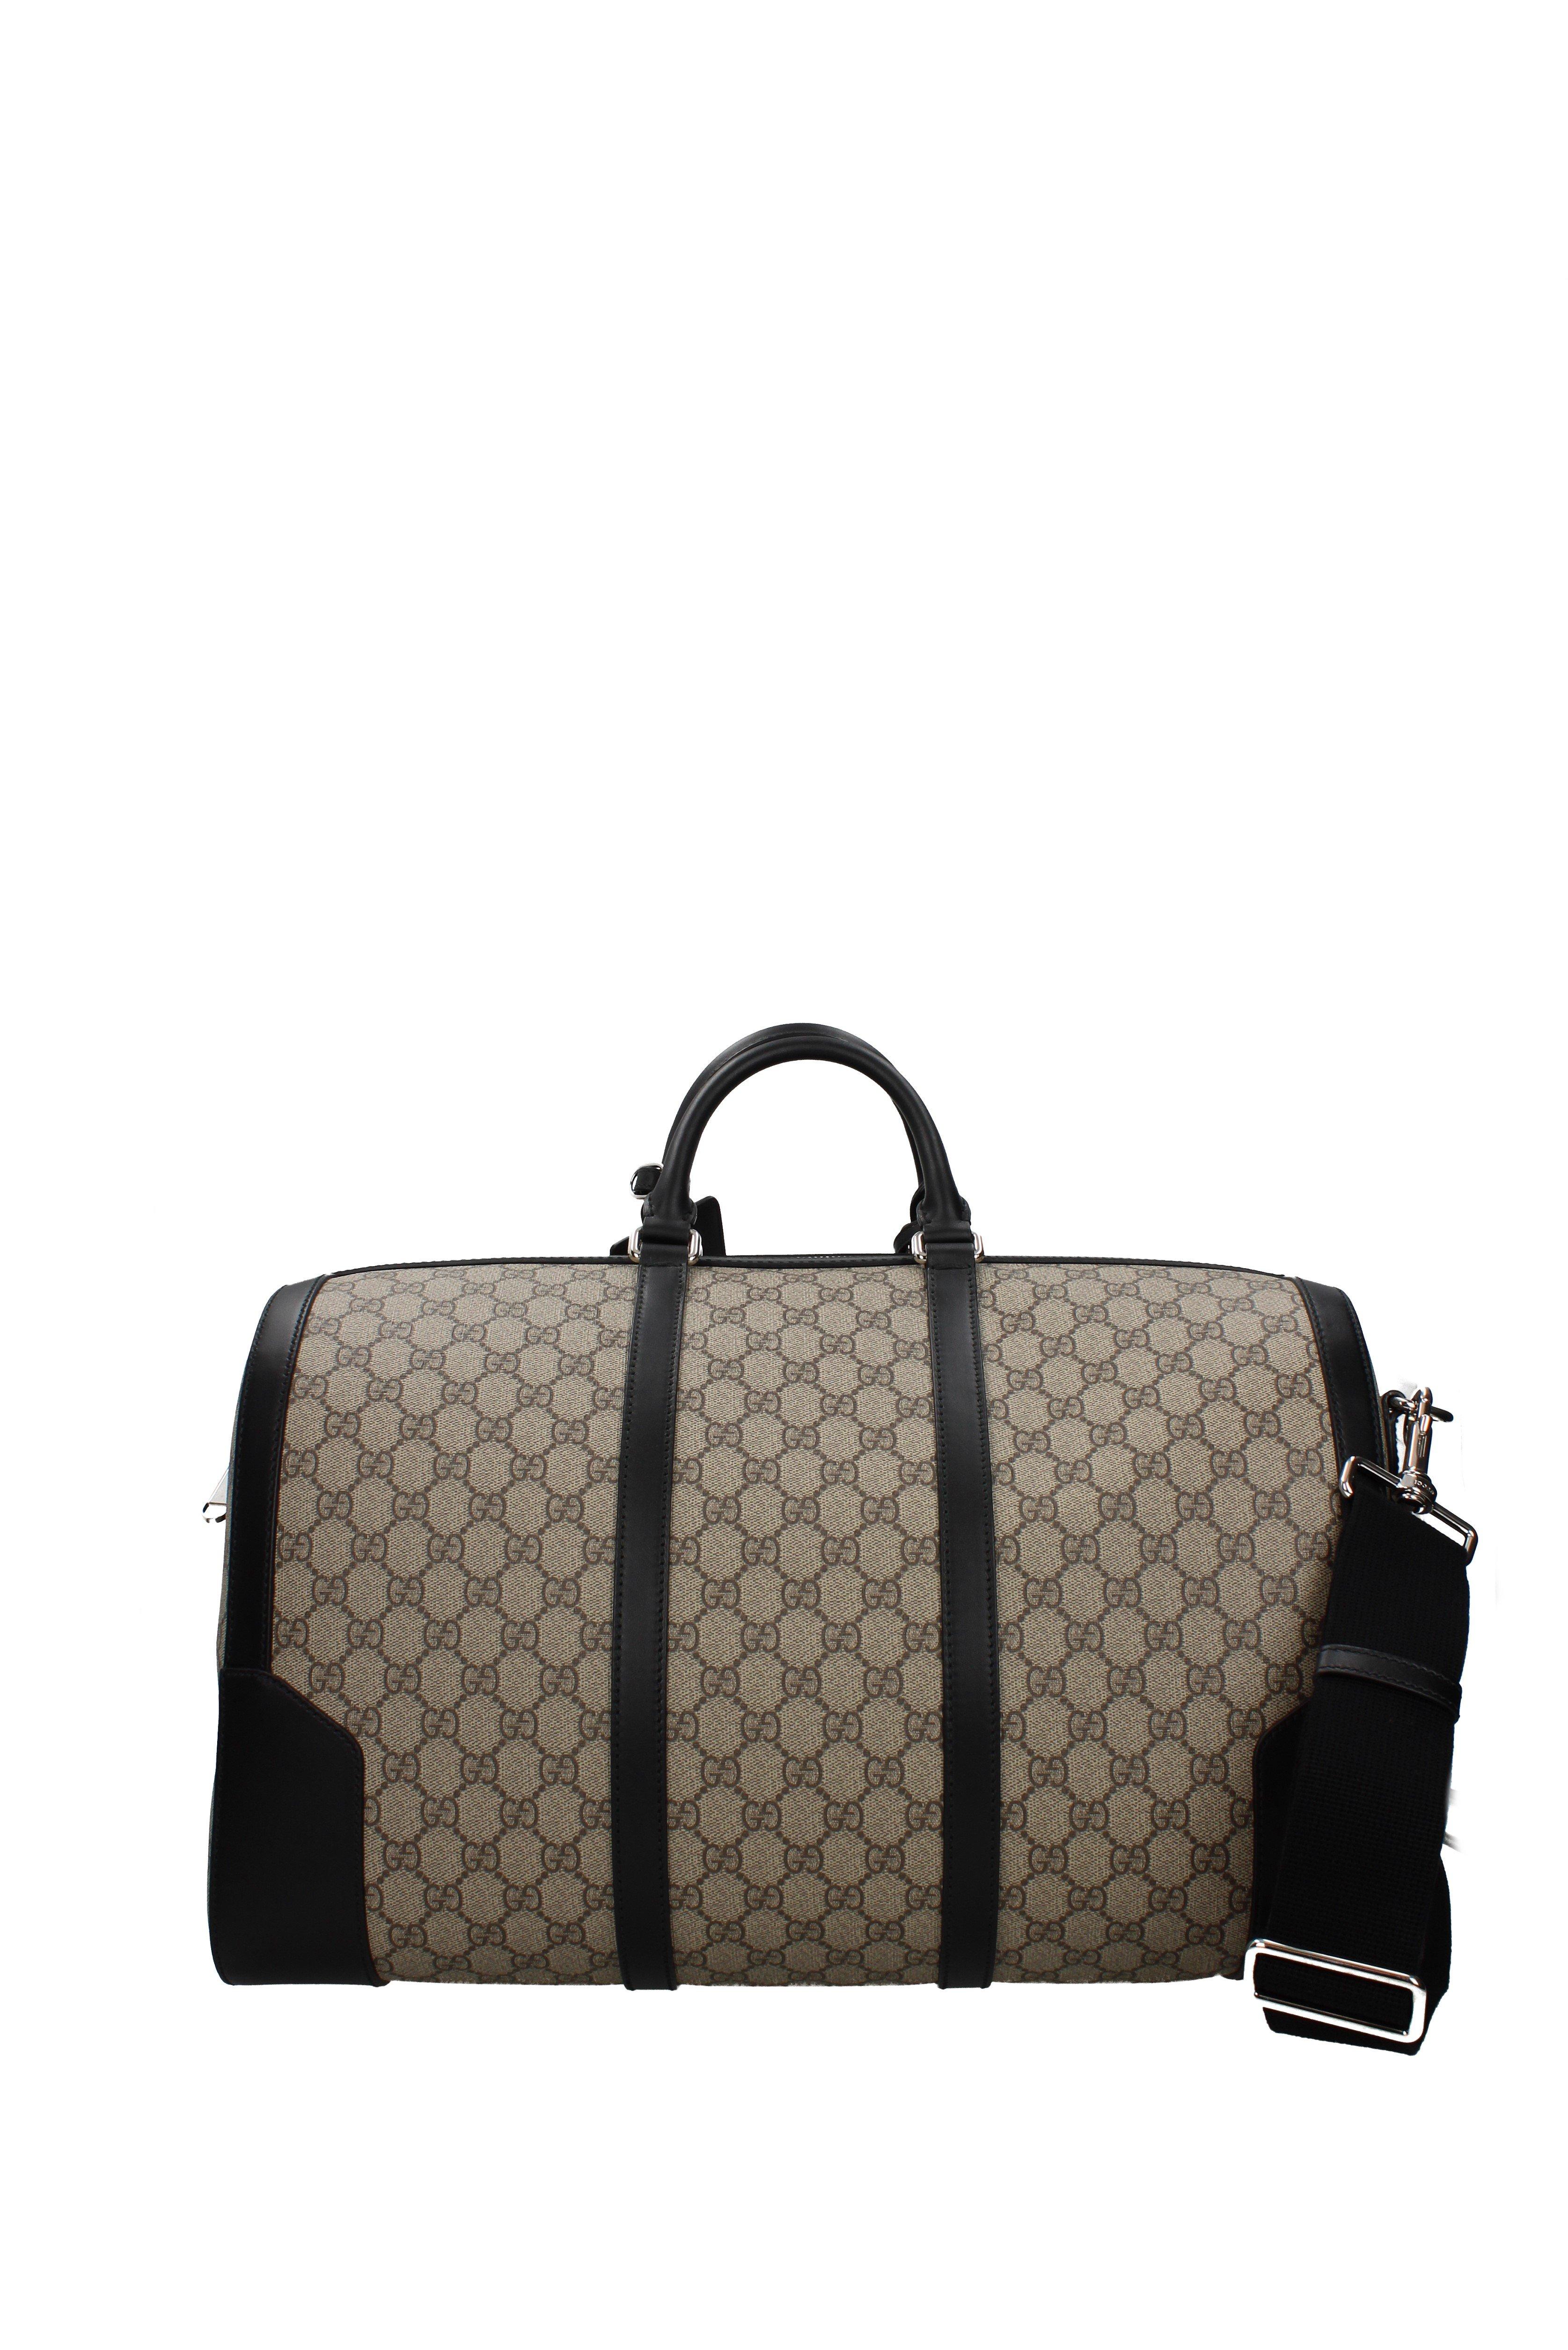 Gucci Leather Travel Bags Men Beige for Men - Lyst